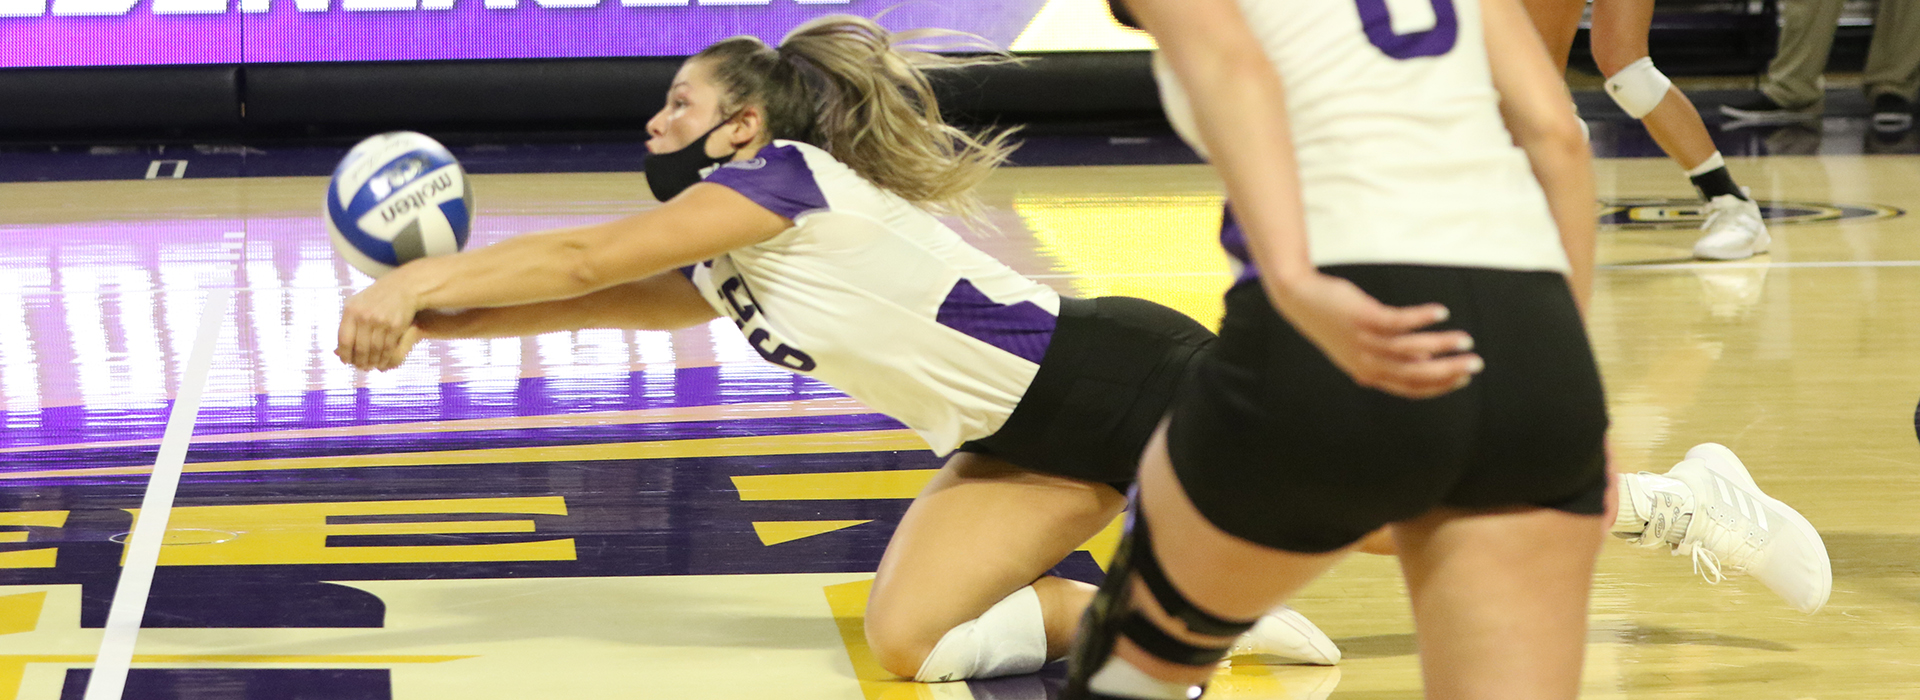 Golden Eagles come up aces in 3-1 win over in-state foe Belmont